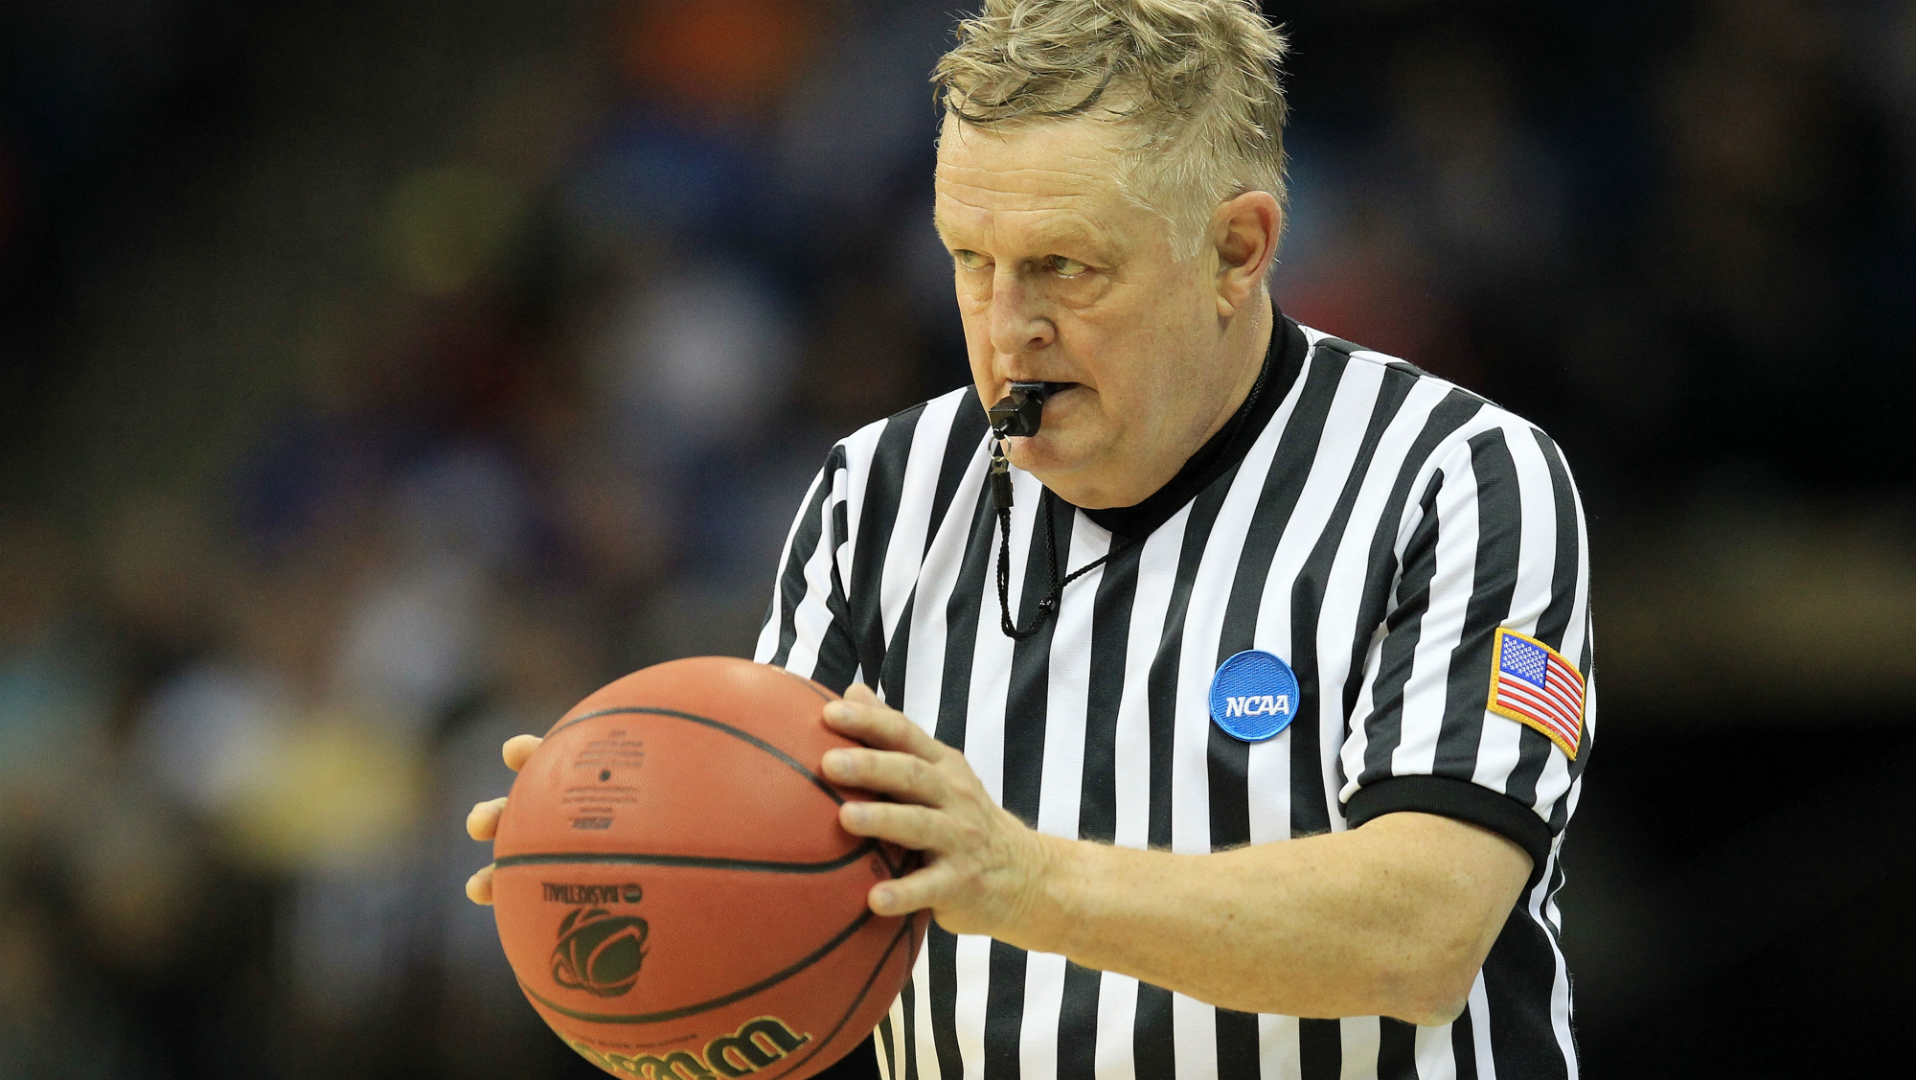 Ncaa Referee Jim Burr Retires After 39 Years Ncaa Basketball Sporting News